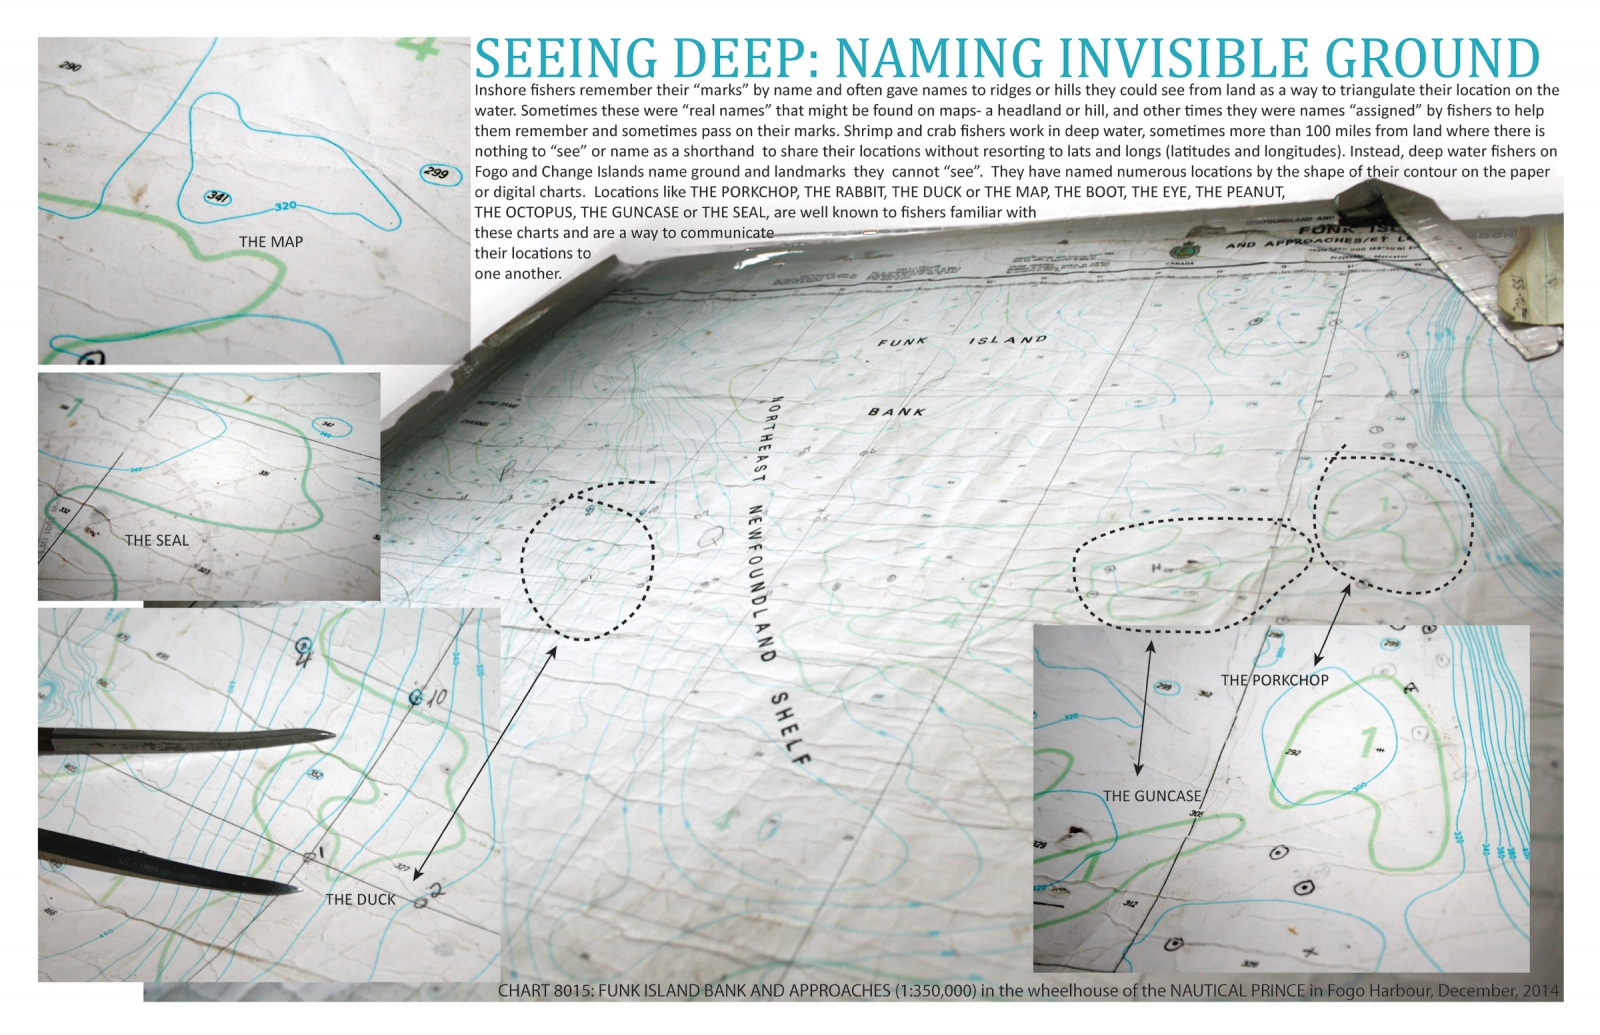 Seeing Deep: Naming Invisible Ground